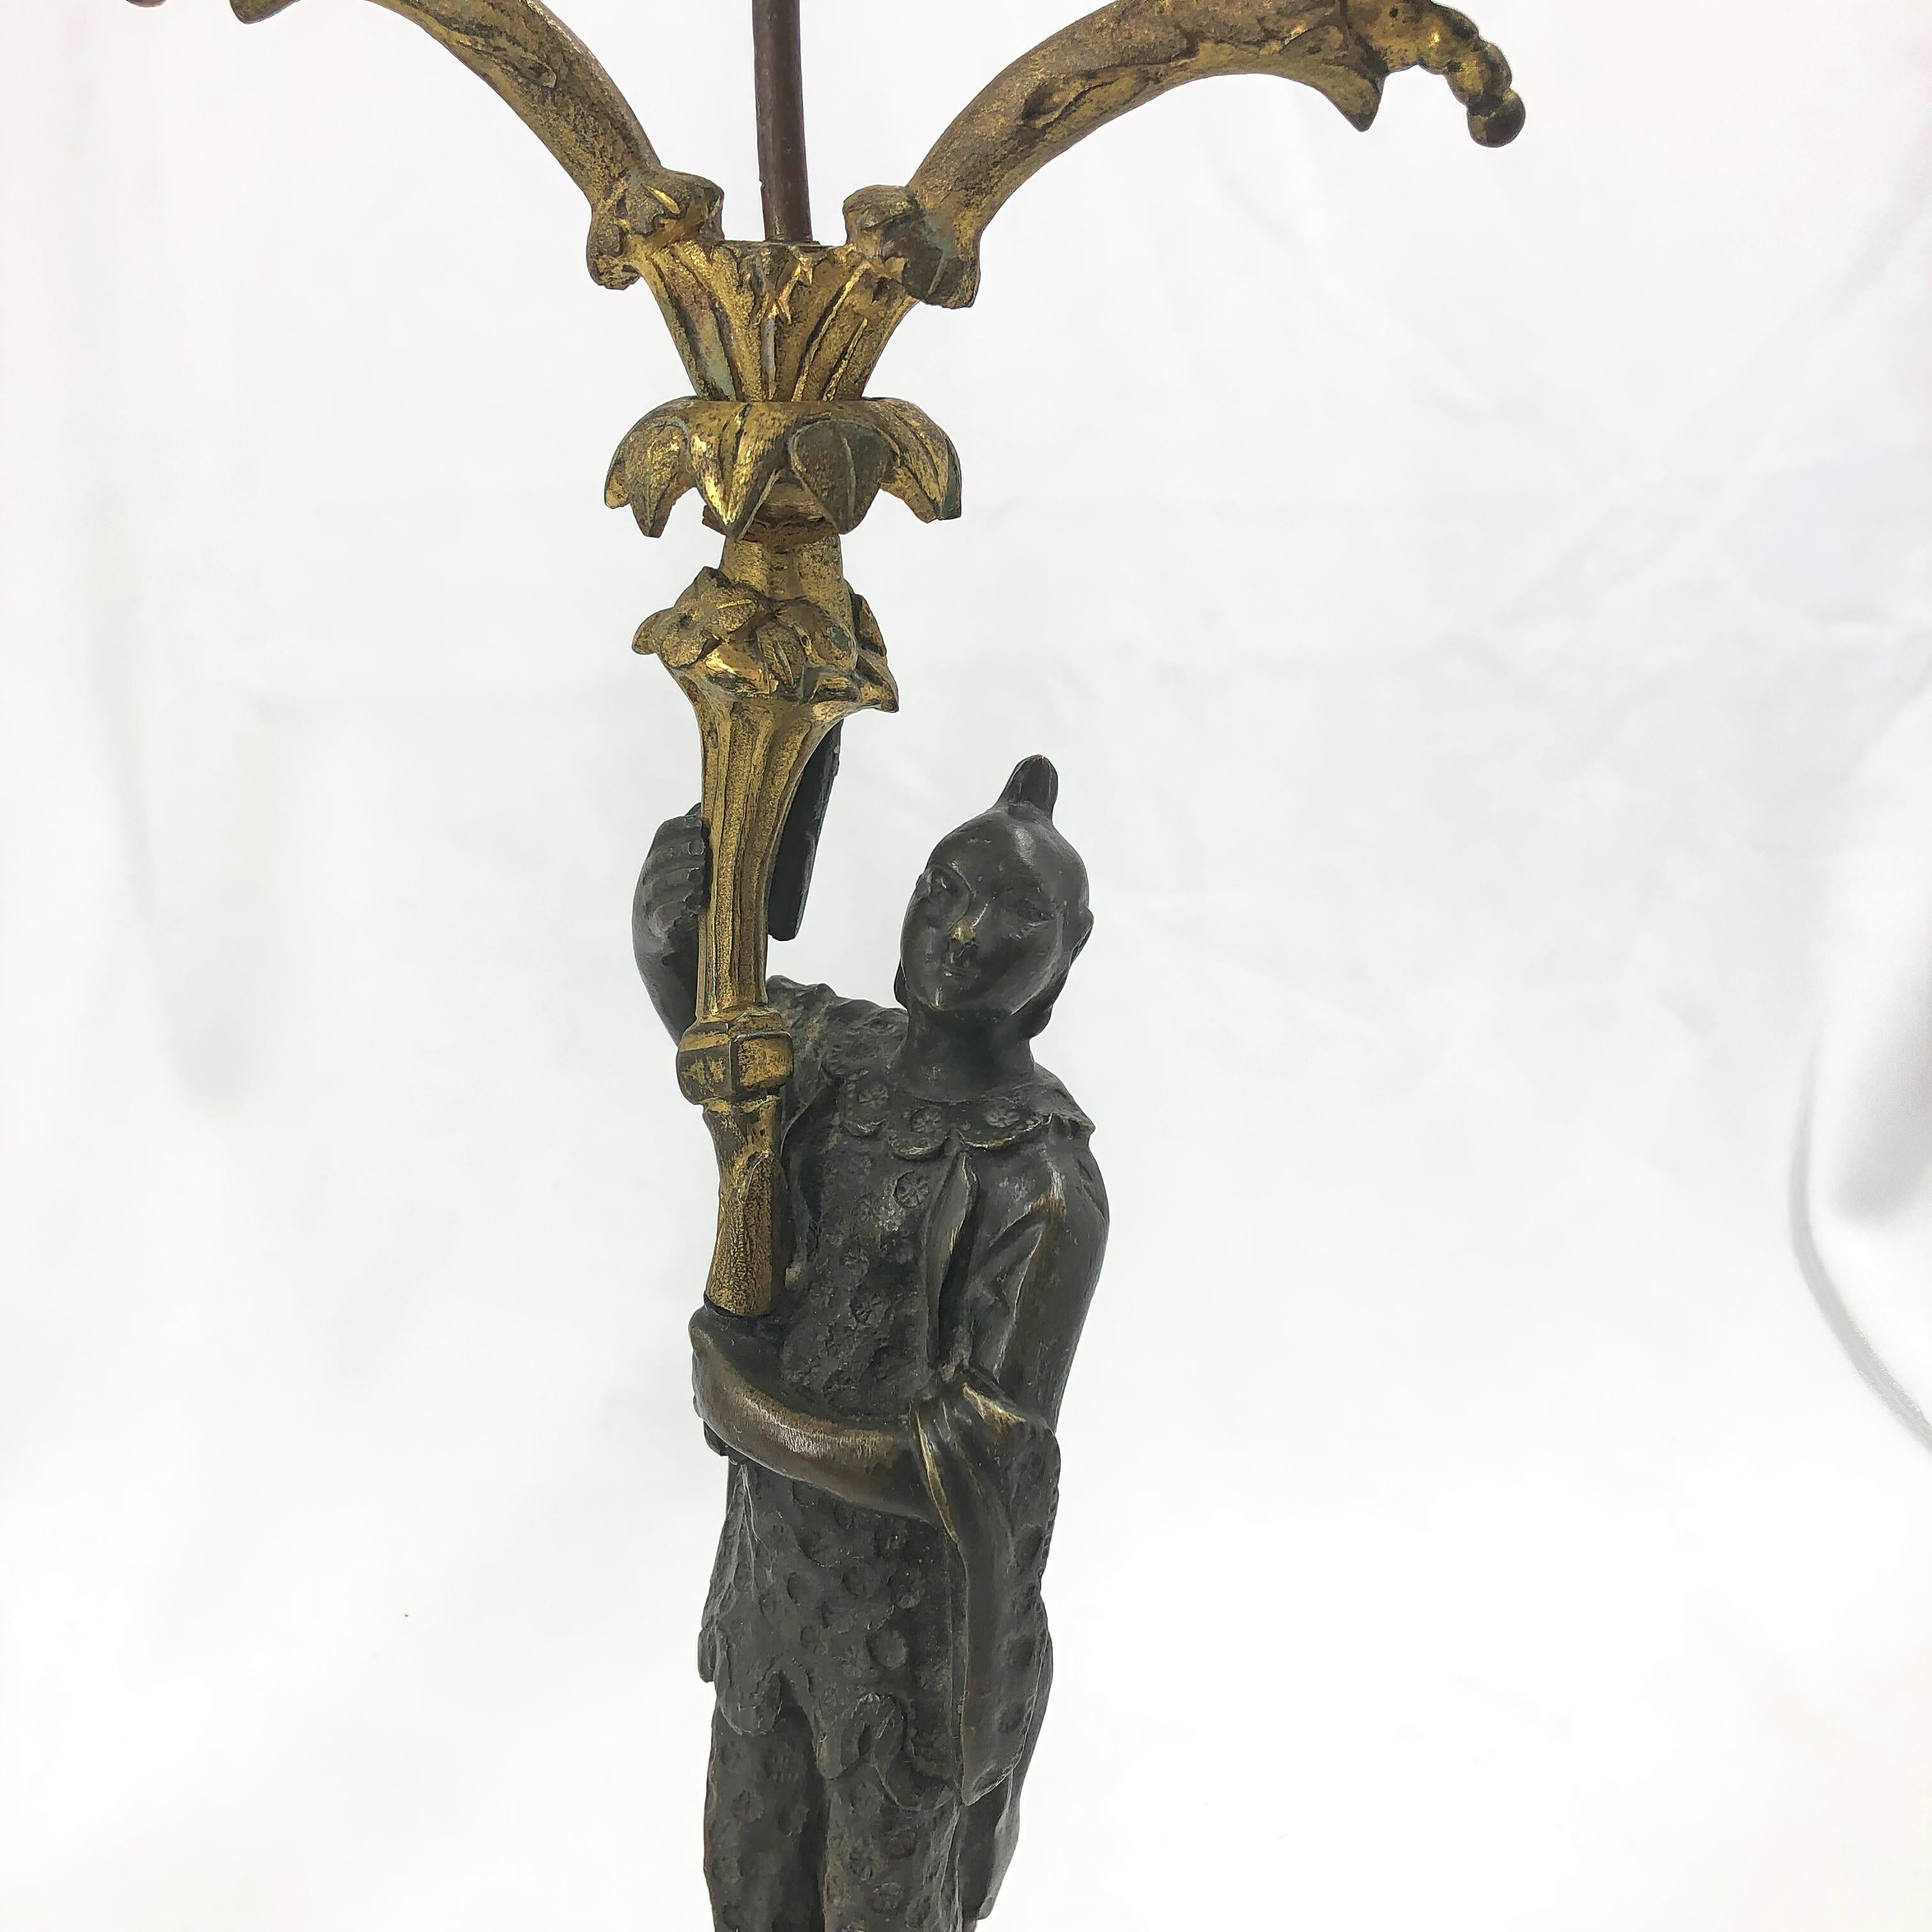 A rare pair of Regency chinoiserie figural candelabra with traditionally dressed men in robes holding a gilt bronze palm tree and leaf form arms, standing on bronze chased round neoclassic pedestals.